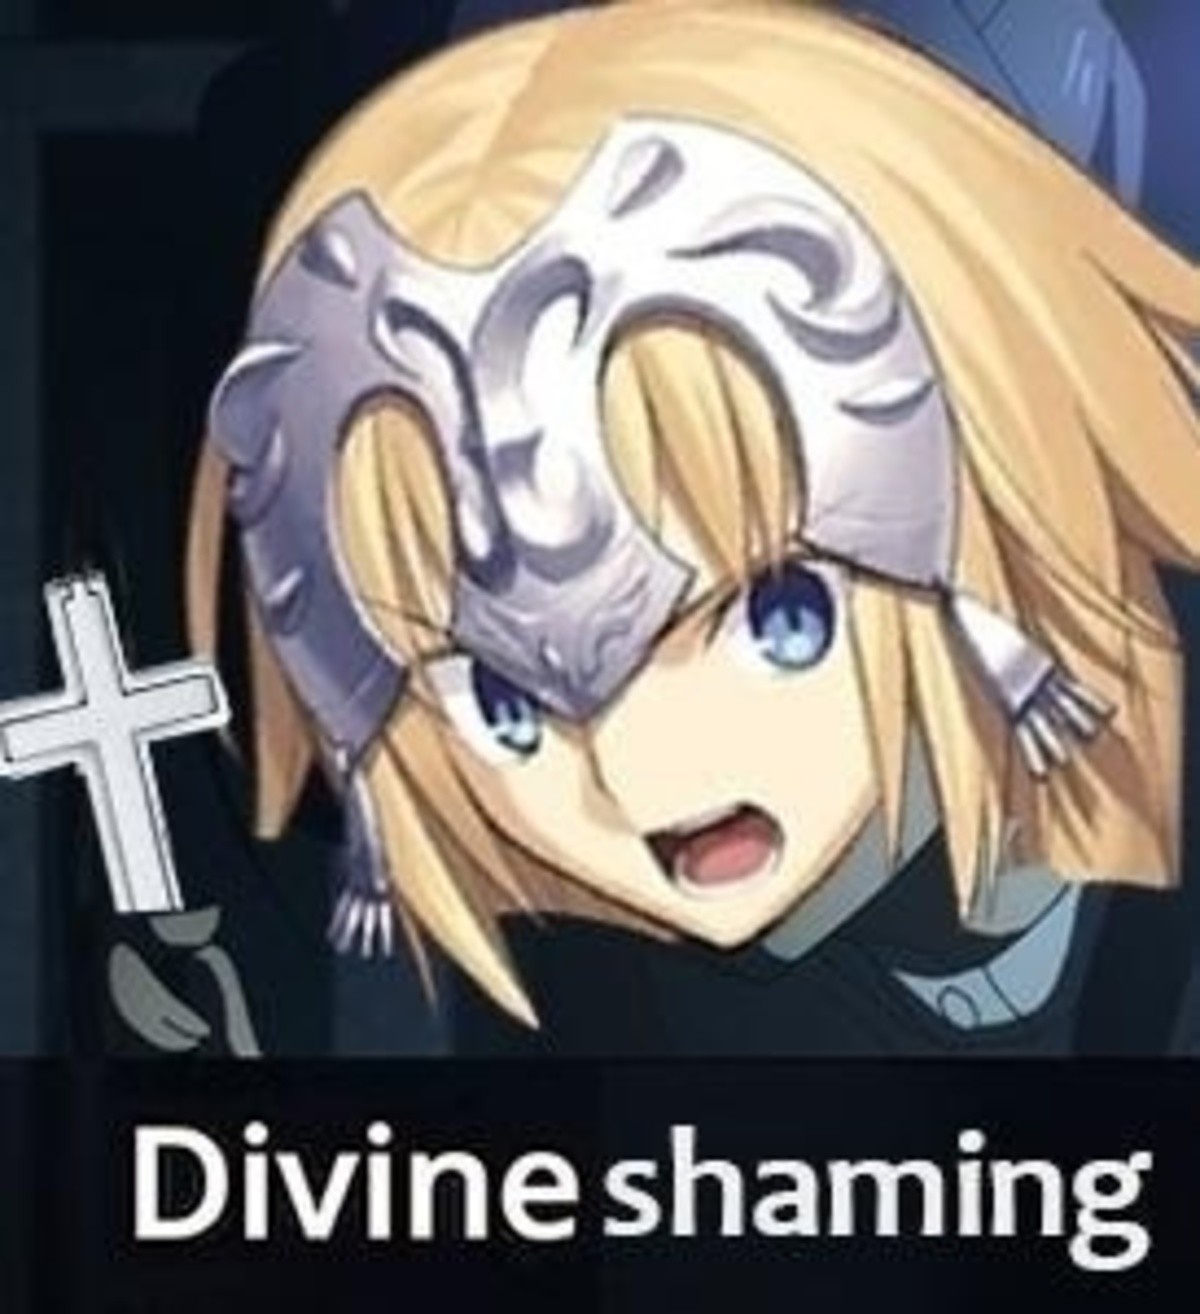 This is a Christian Meme Zone Now!. Post all of your christian memes to cleanse fj sins join list: KnightWaifu (1007 subs)Mention History.. The folder was empty ;(